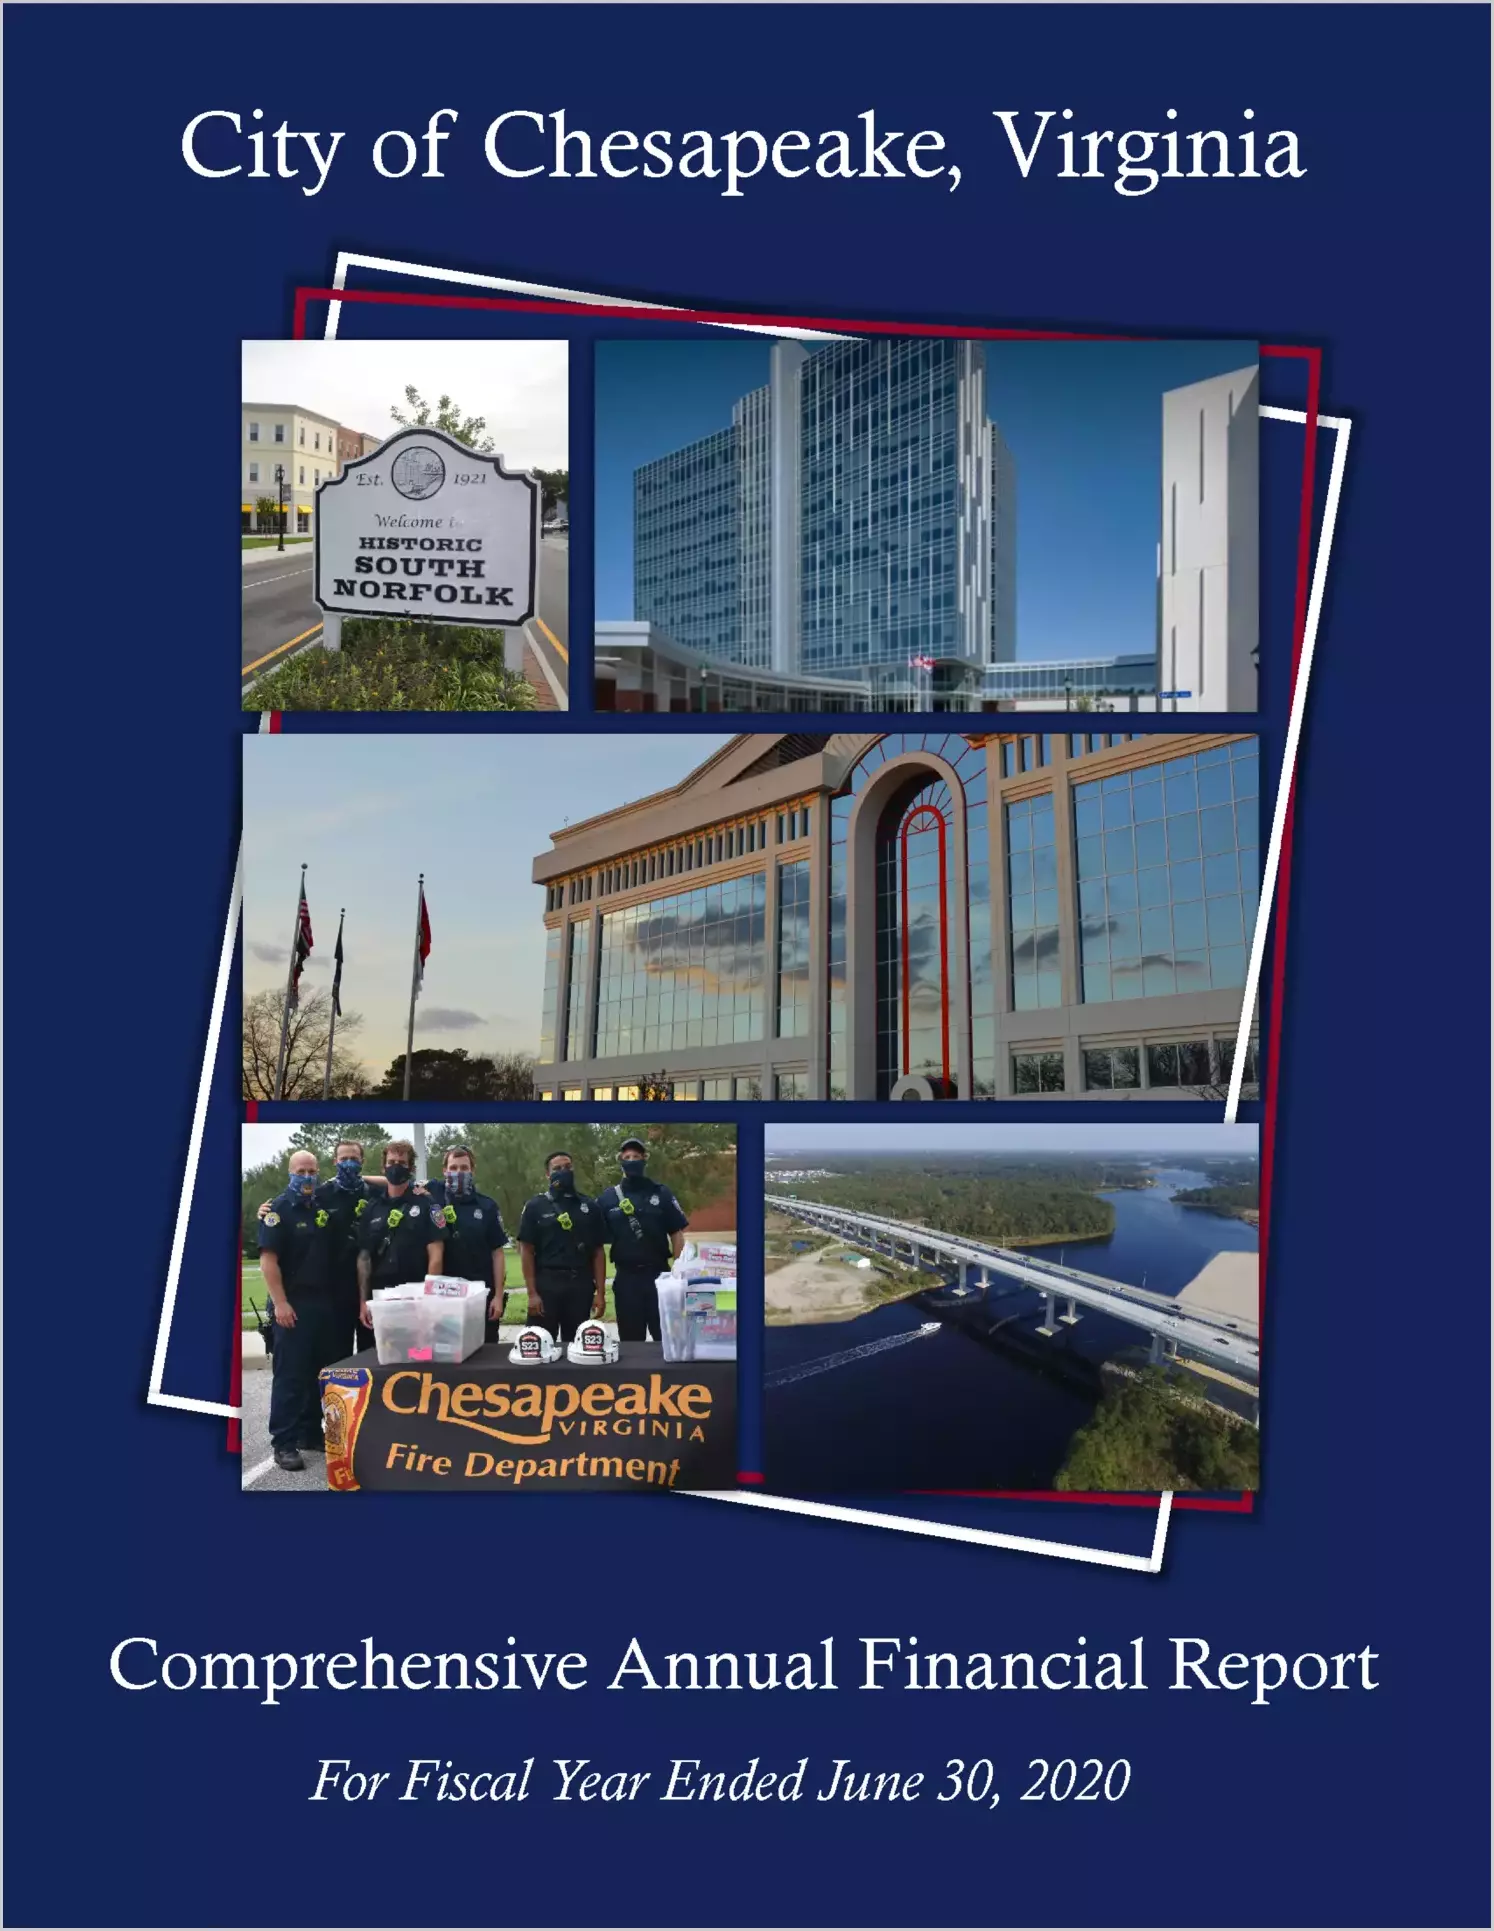 2020 Public Schools Annual Financial Report for City of Chesapeake